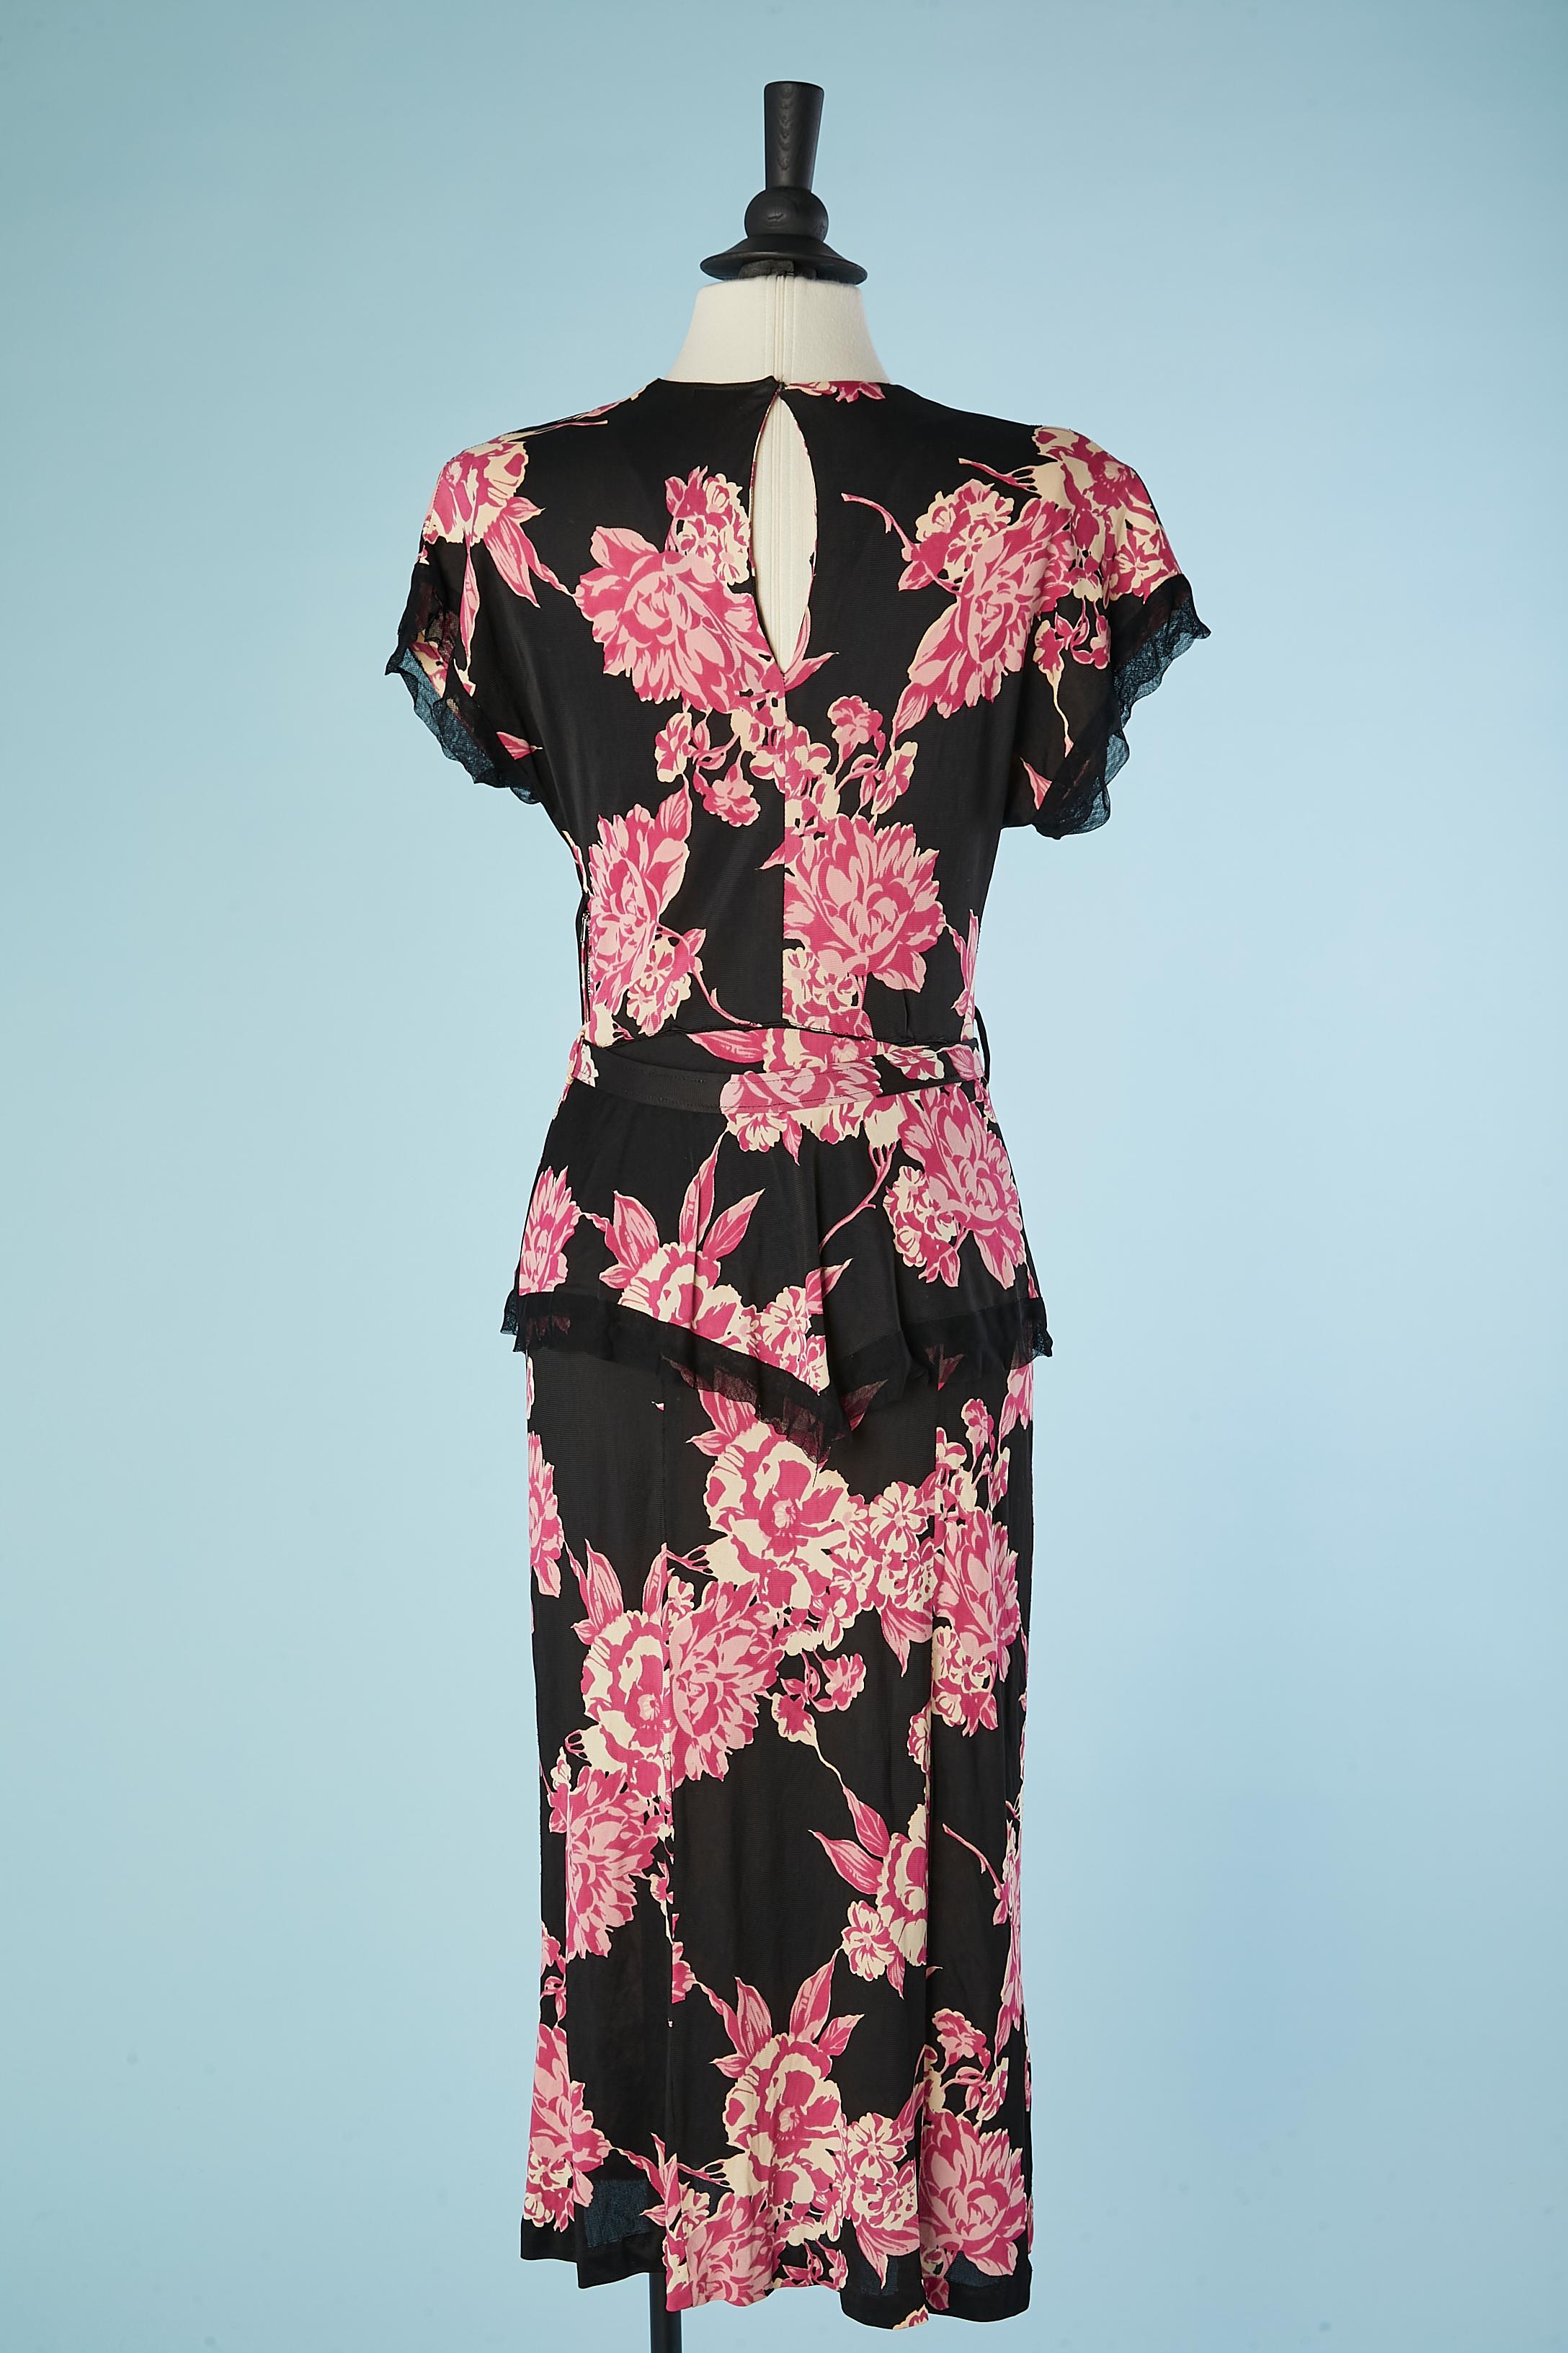 Women's Circa 1940's jersey cocktail dress with pink flowers printed For Sale